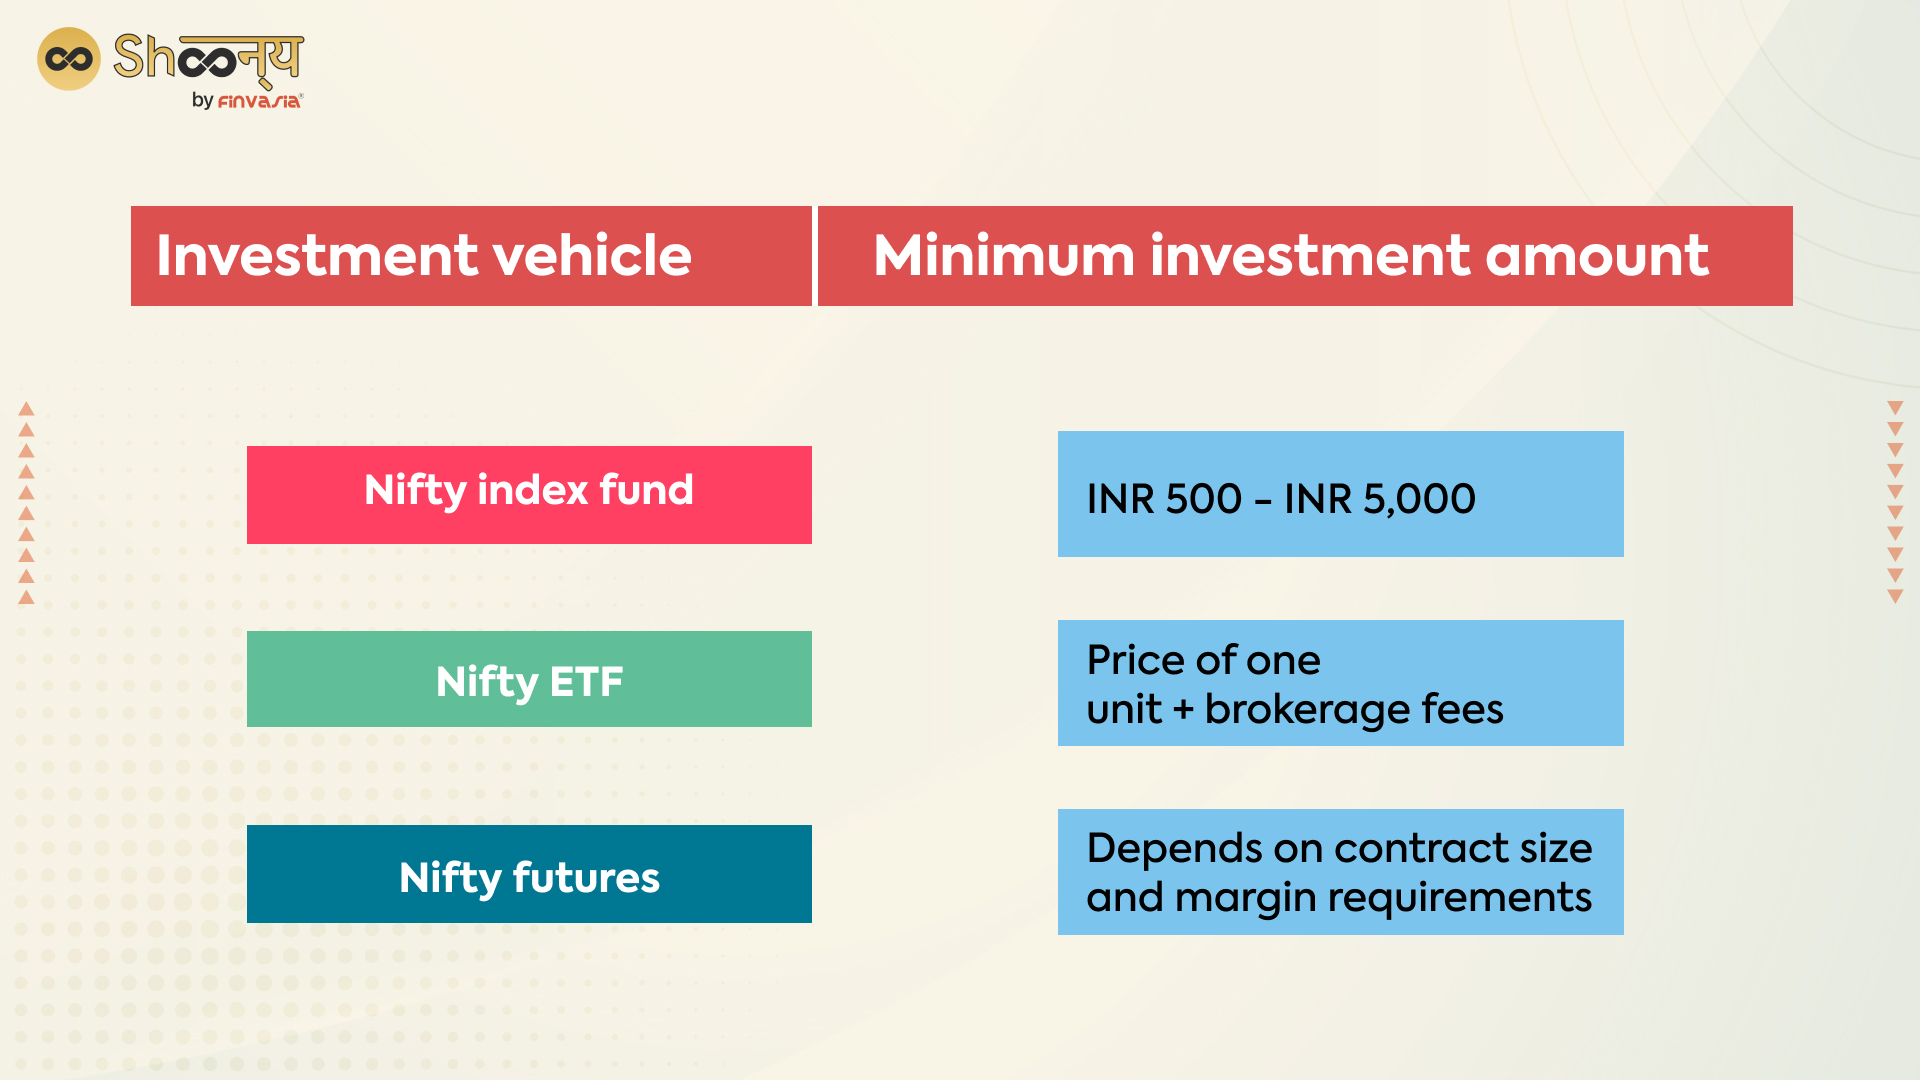 minimum amount to invest in the Nifty index